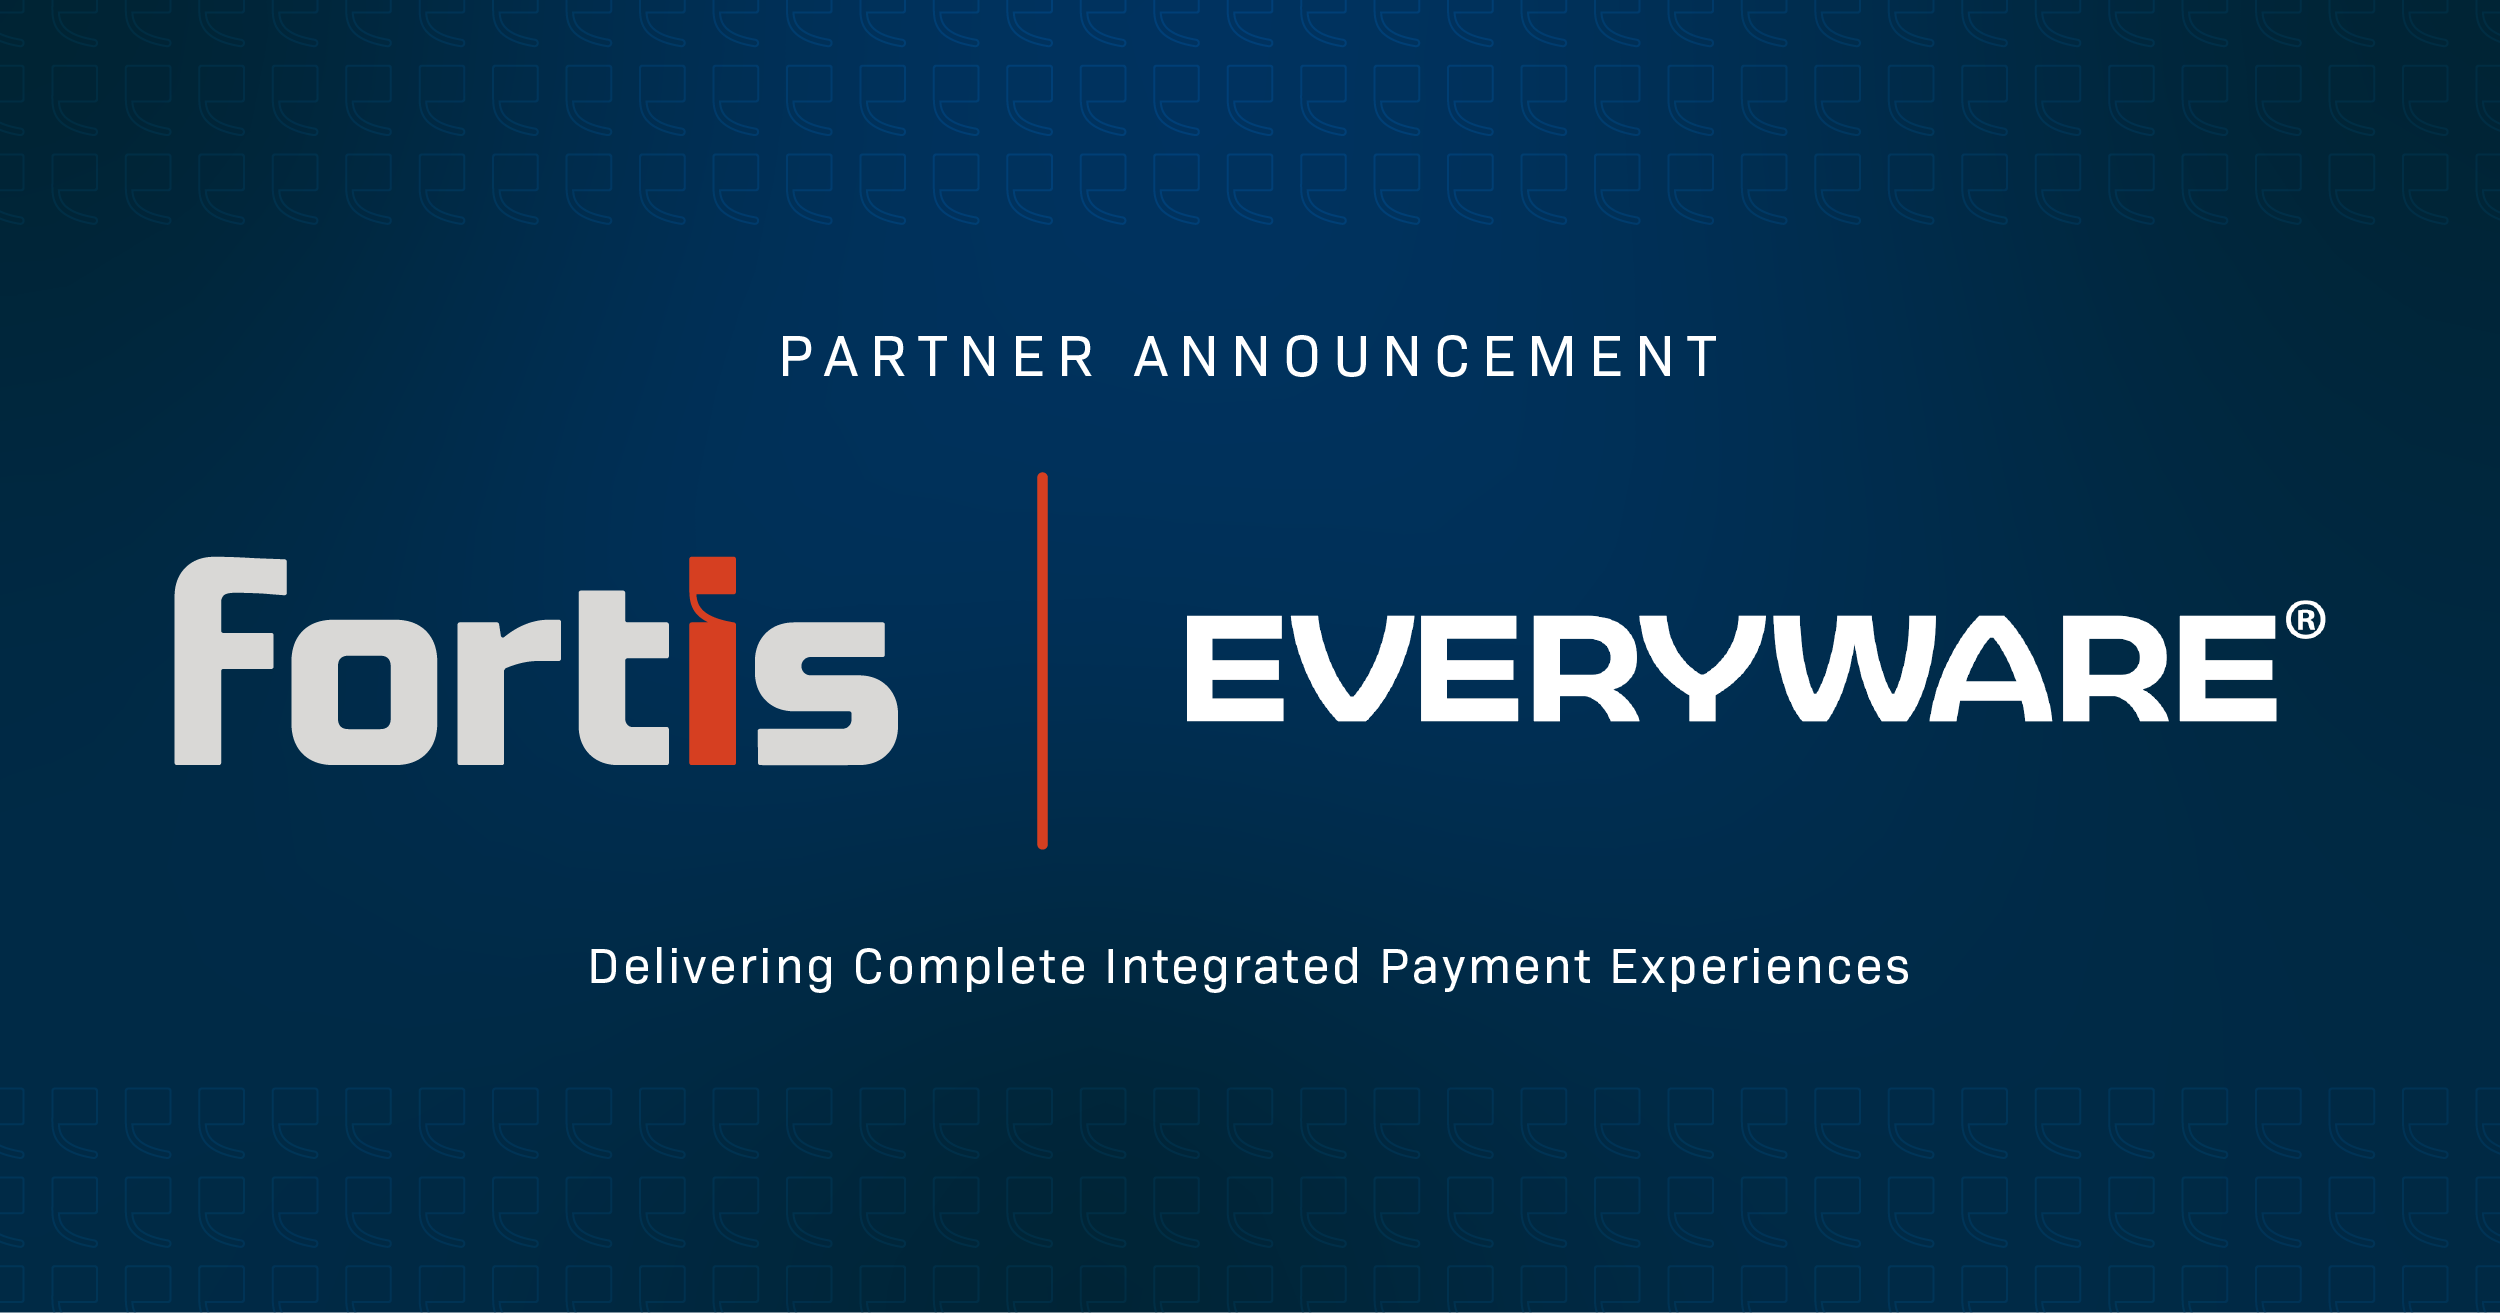 Fortis and Everyware® Partner to Deliver a Completely Integrated Payment Experience across Transaction Types - Featured Image